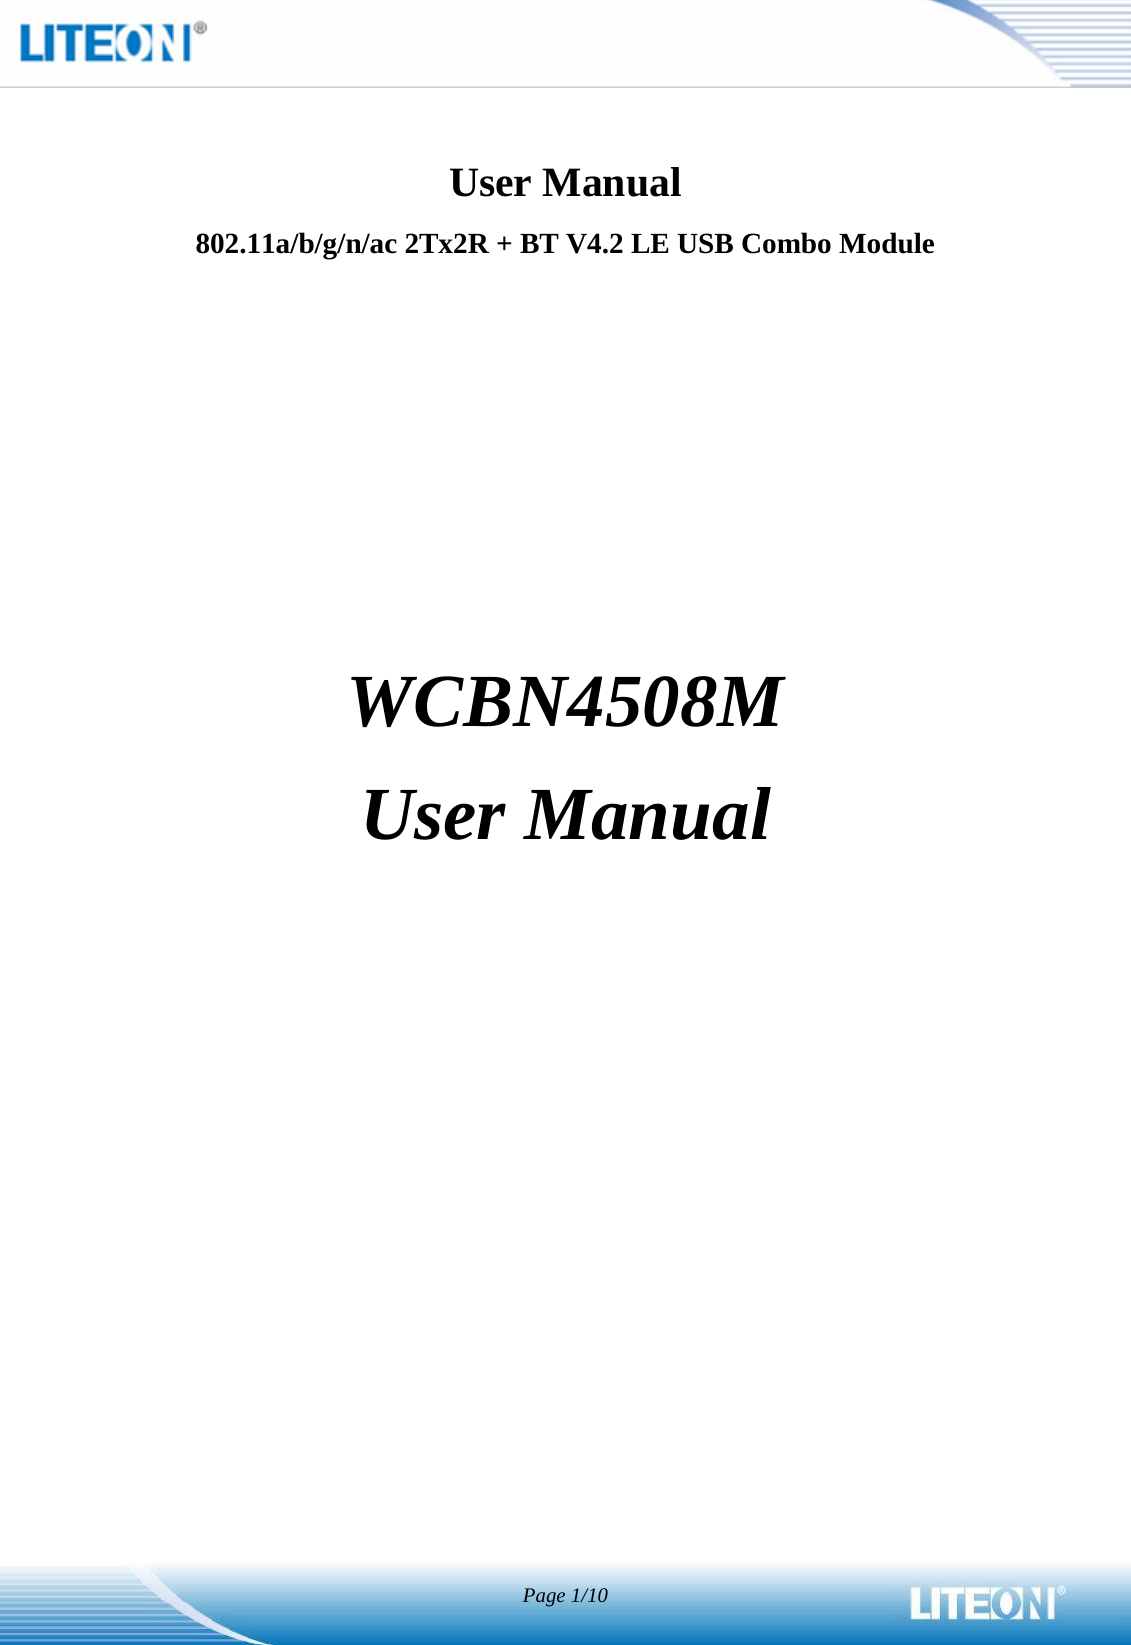    User Manual 802.11a/b/g/n/ac 2Tx2R + BT V4.2 LE USB Combo Module            WCBN4508M User Manual                  Page 1/10 